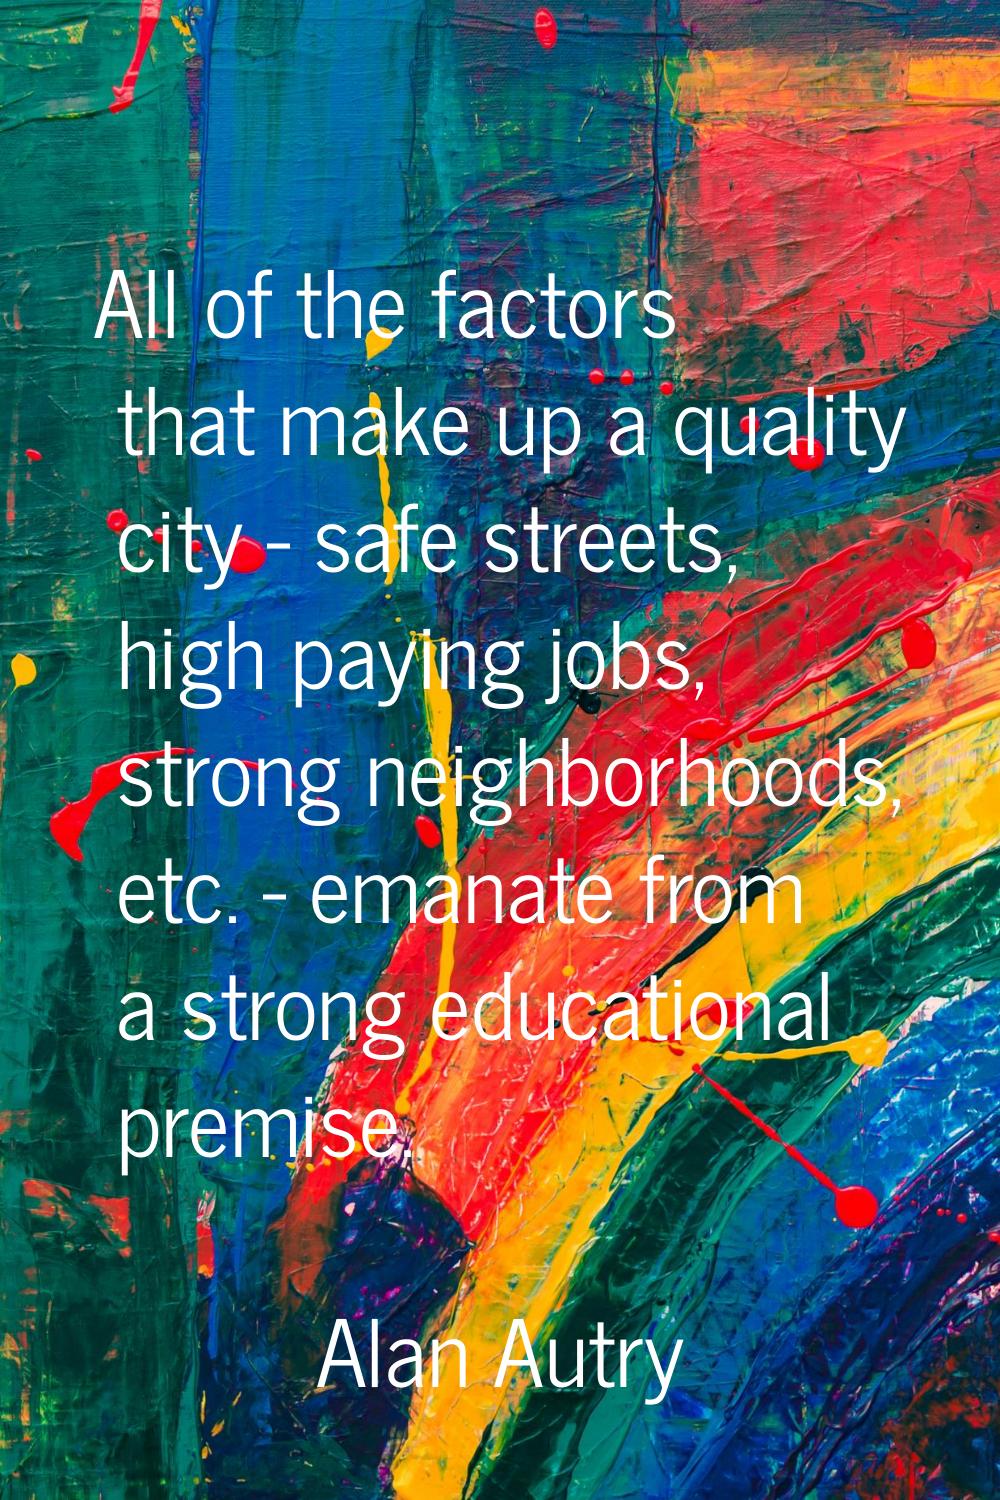 All of the factors that make up a quality city - safe streets, high paying jobs, strong neighborhoo